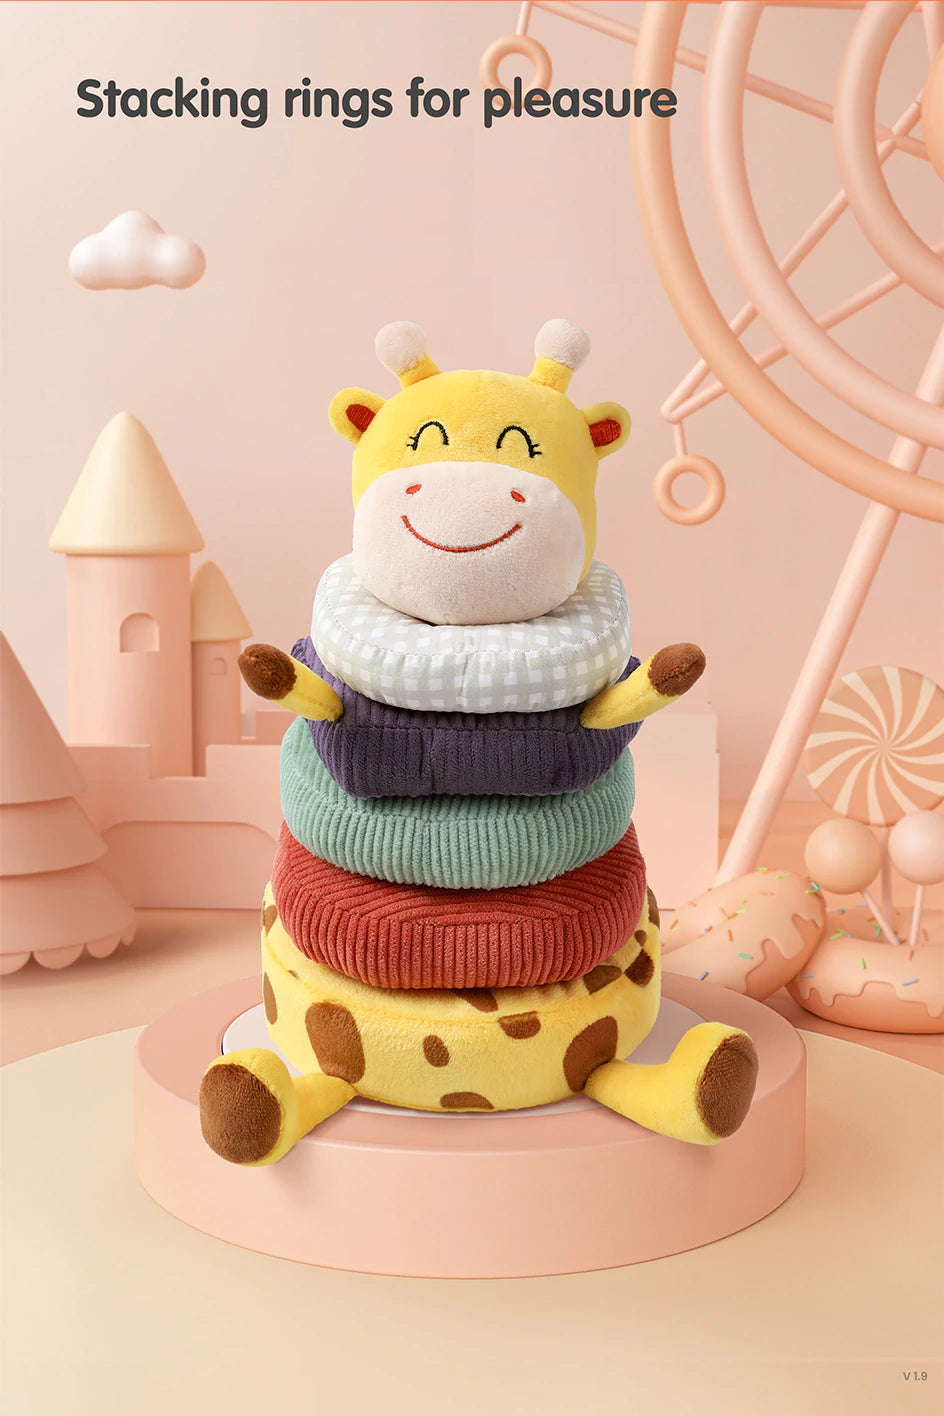 Plush stacking toy featuring giraffe themed elements